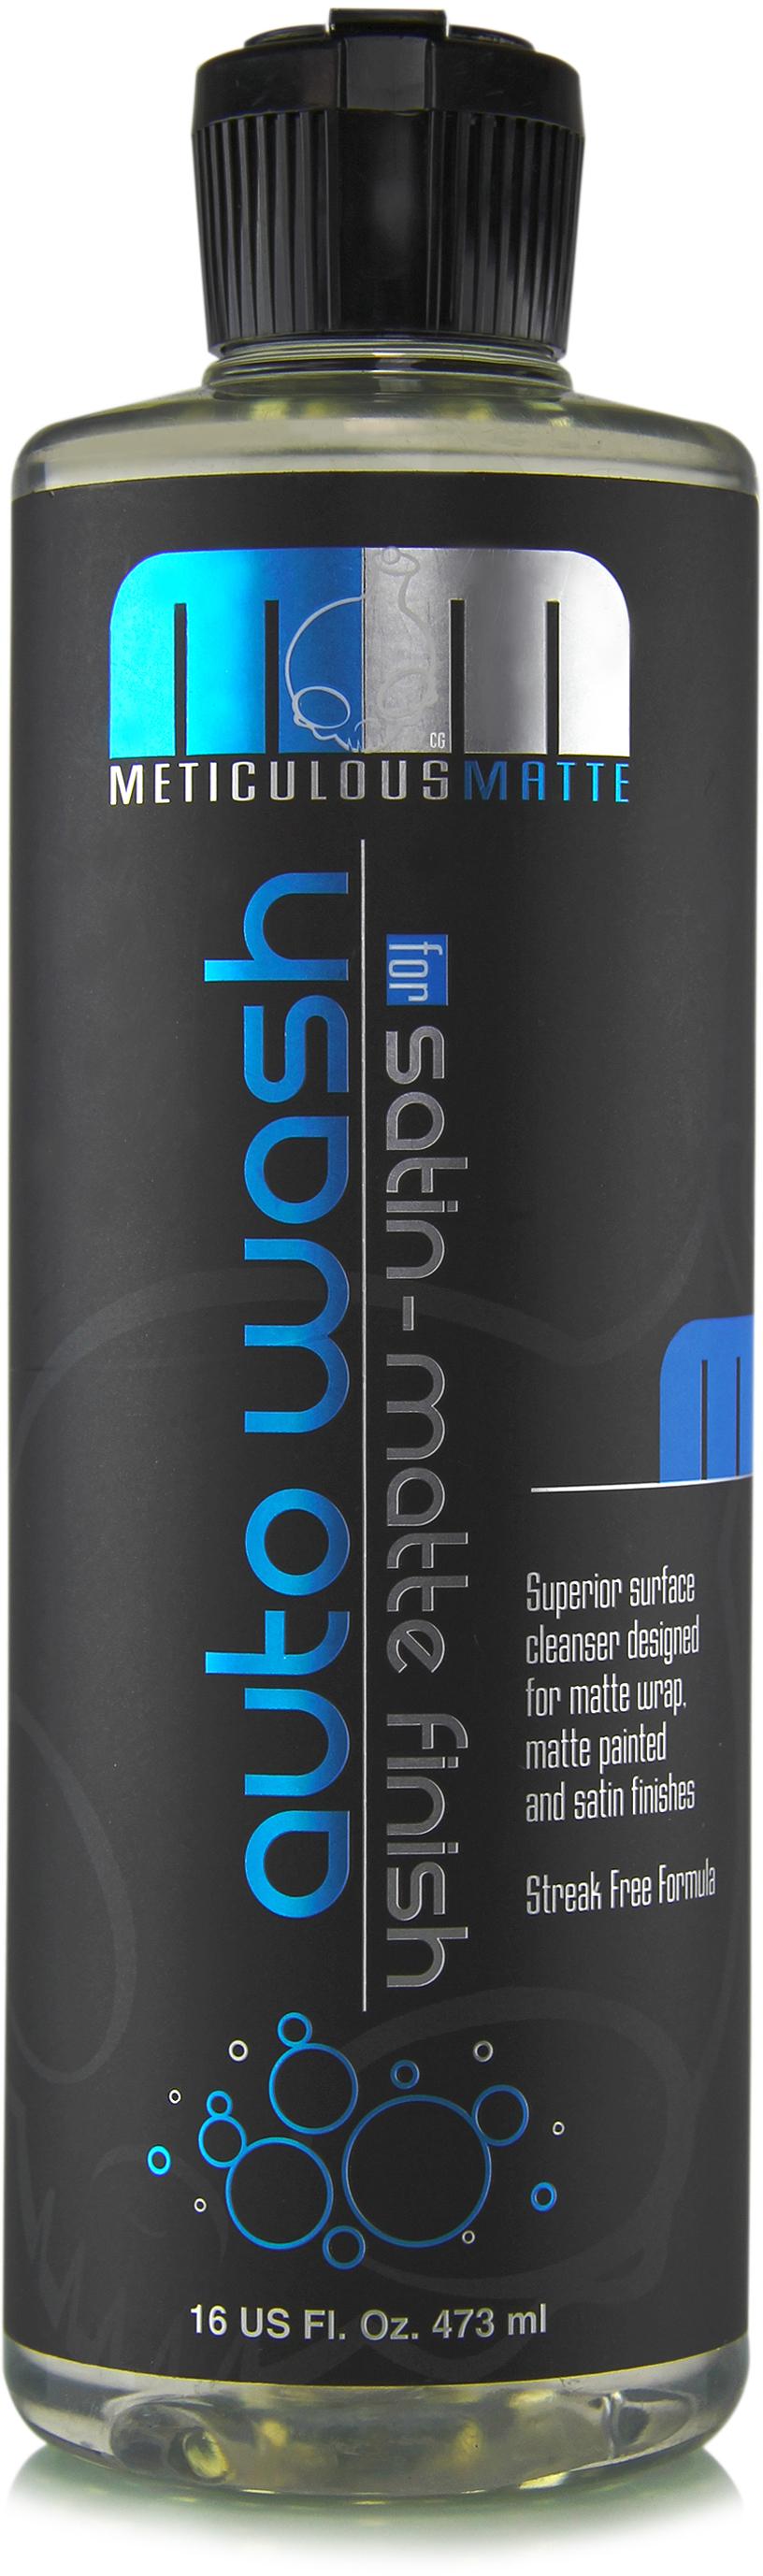 Chemical Guys Meticulous Matte Auto Wash Shampoo